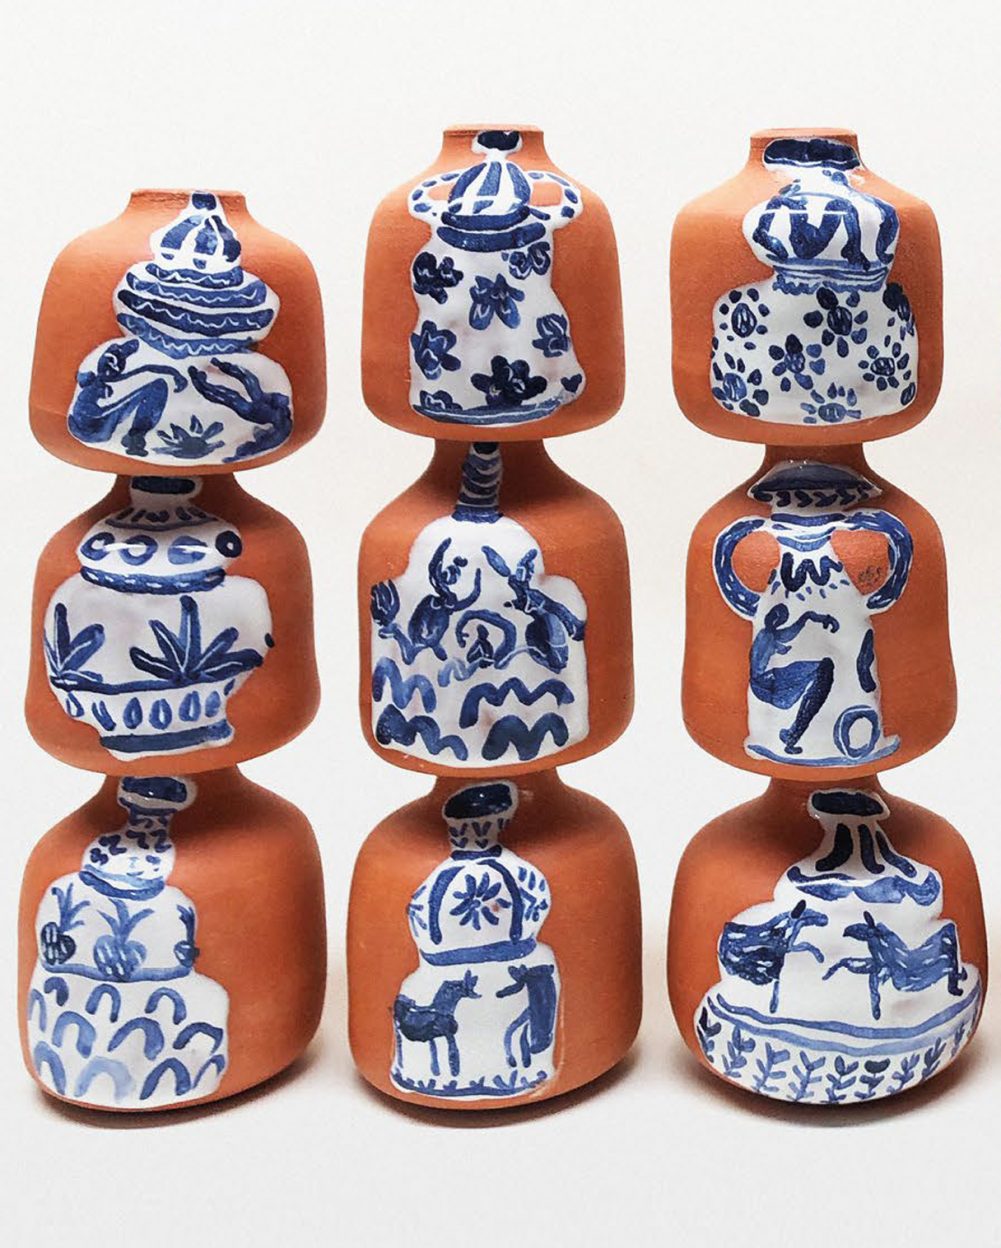 Ceramic pots with painted designs stacked on top of each other.